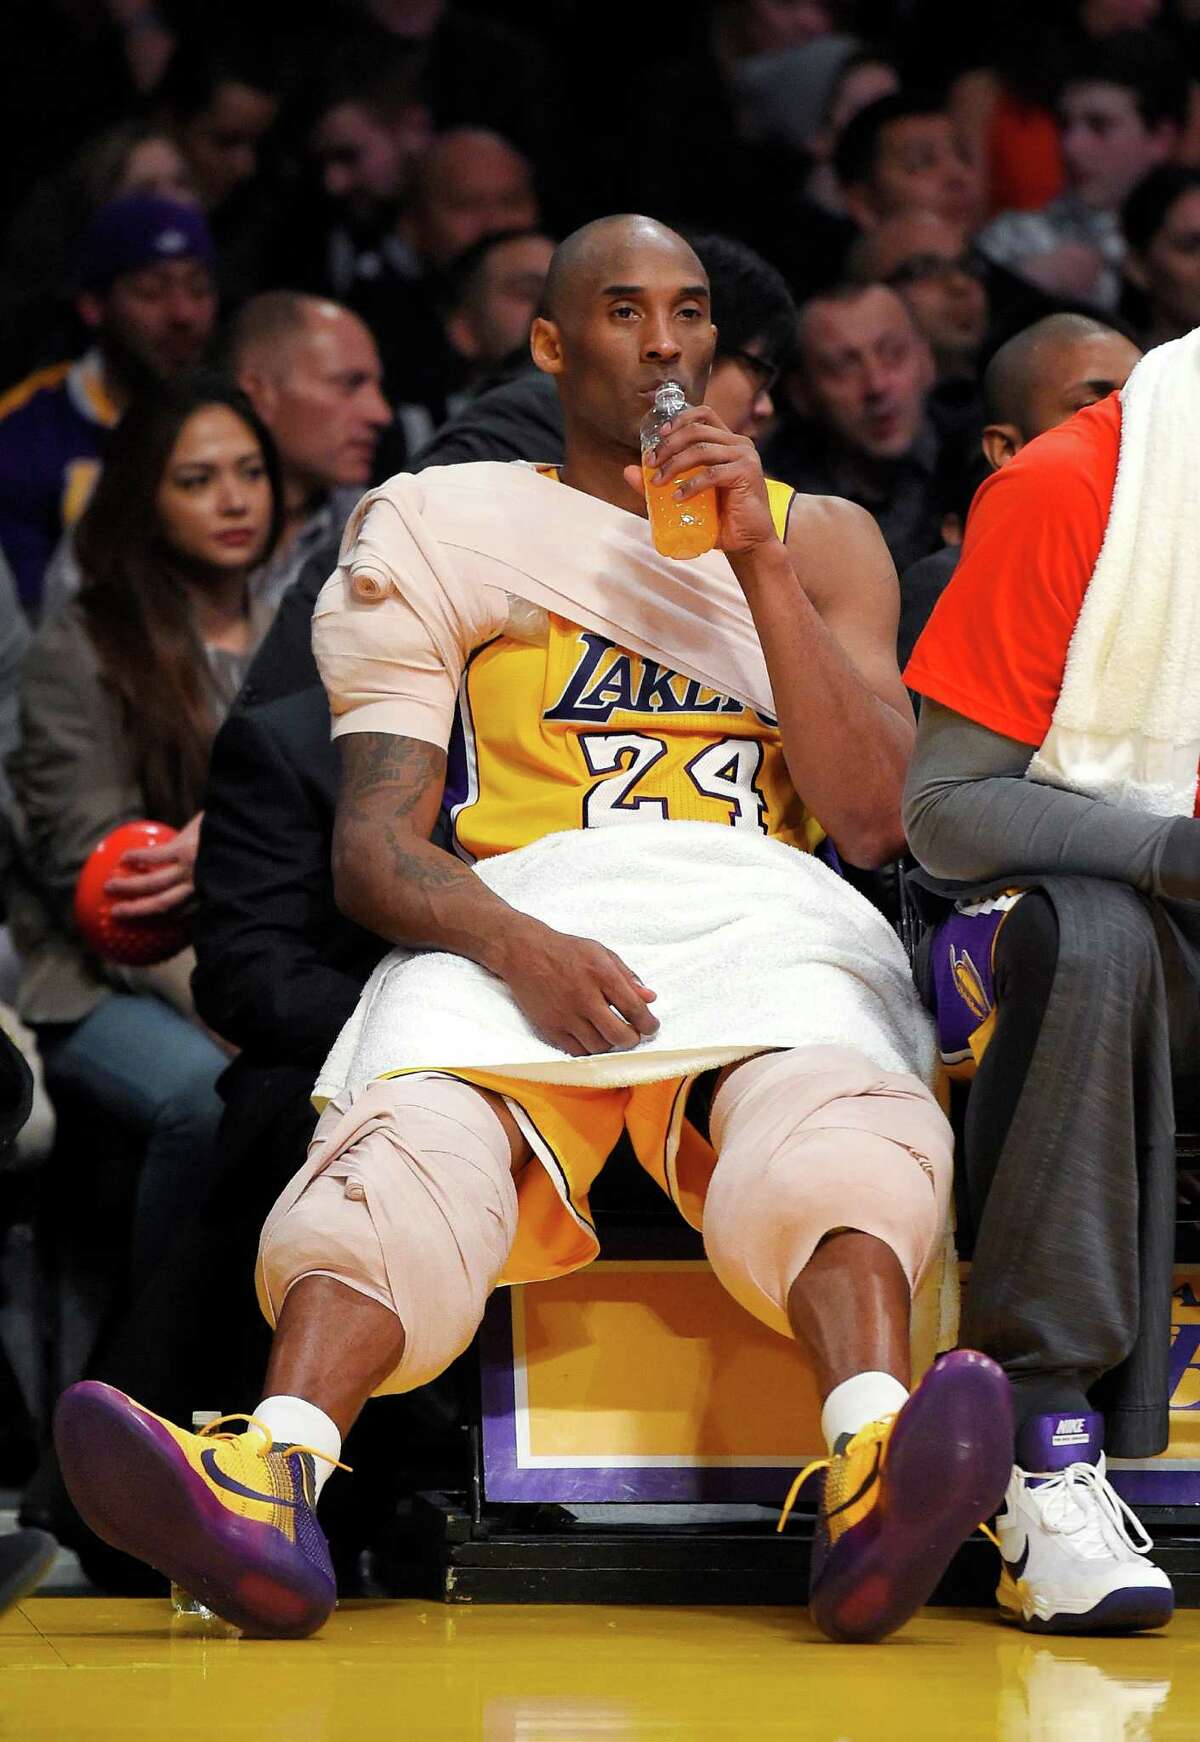 Los Angeles Lakers forward Kobe Bryant sits on the bench during the second half of the Lakers' NBA basketball game against the San Antonio Spurs, Friday, Jan. 22, 2016, in Los Angeles. The Spurs won 108-95. (AP Photo/Mark J. Terrill)